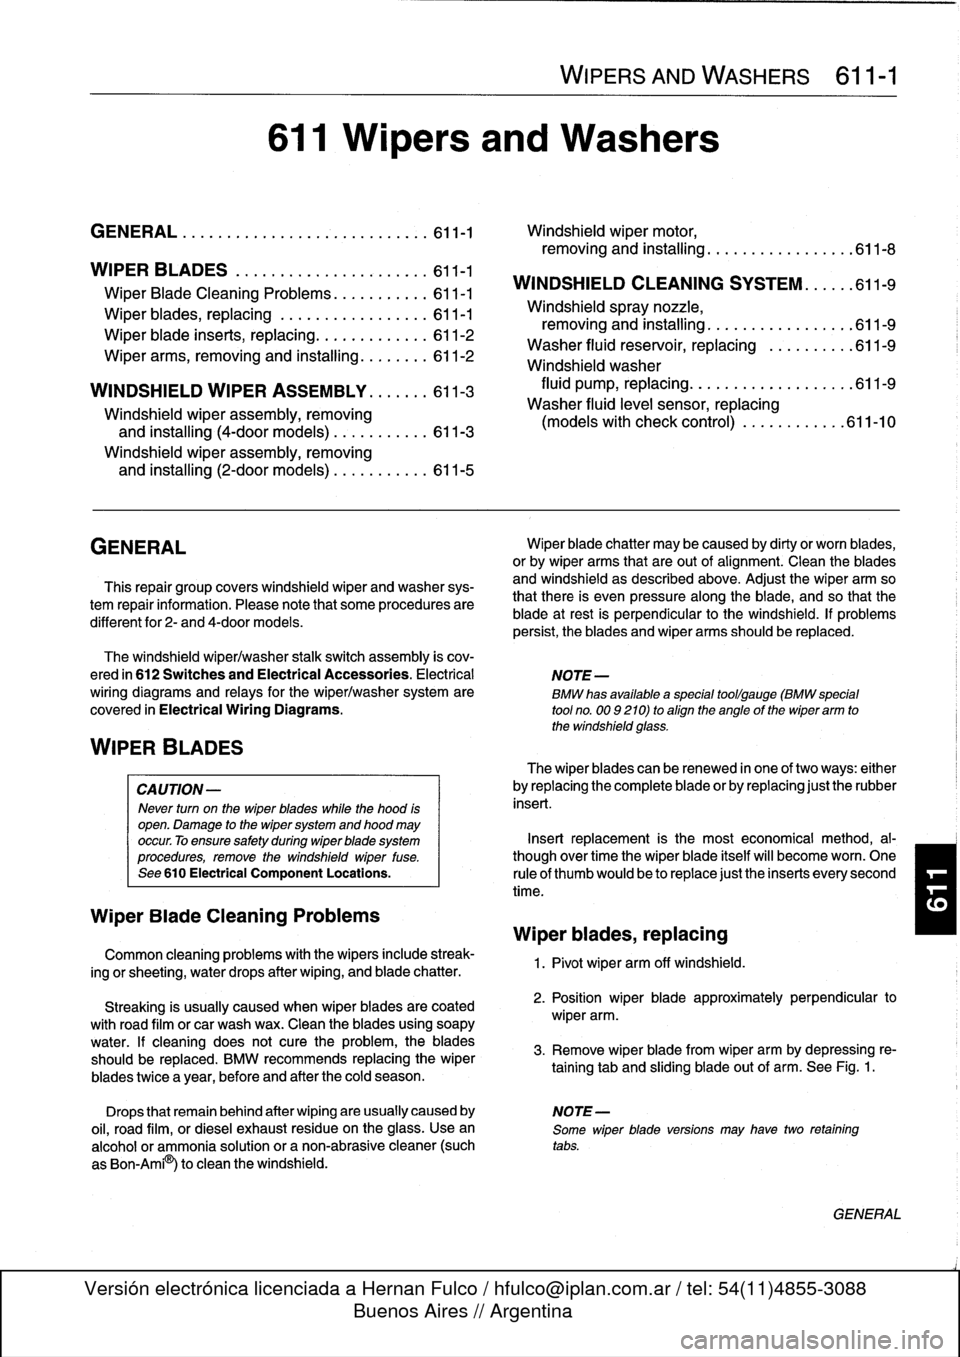 BMW 323i 1997 E36 Workshop Manual 
611
Wipers
and
Washers

GENERAL
..
.
.
.
.
.
.
.
.
.
.
.
.
.
.....
.
......
.
611-1

	

Windshield
wiper
motor,

removing
and
installing
.
...............
.611-8

WIPER
BLADES
.
.
.
.....
.
.
.
.
.
.